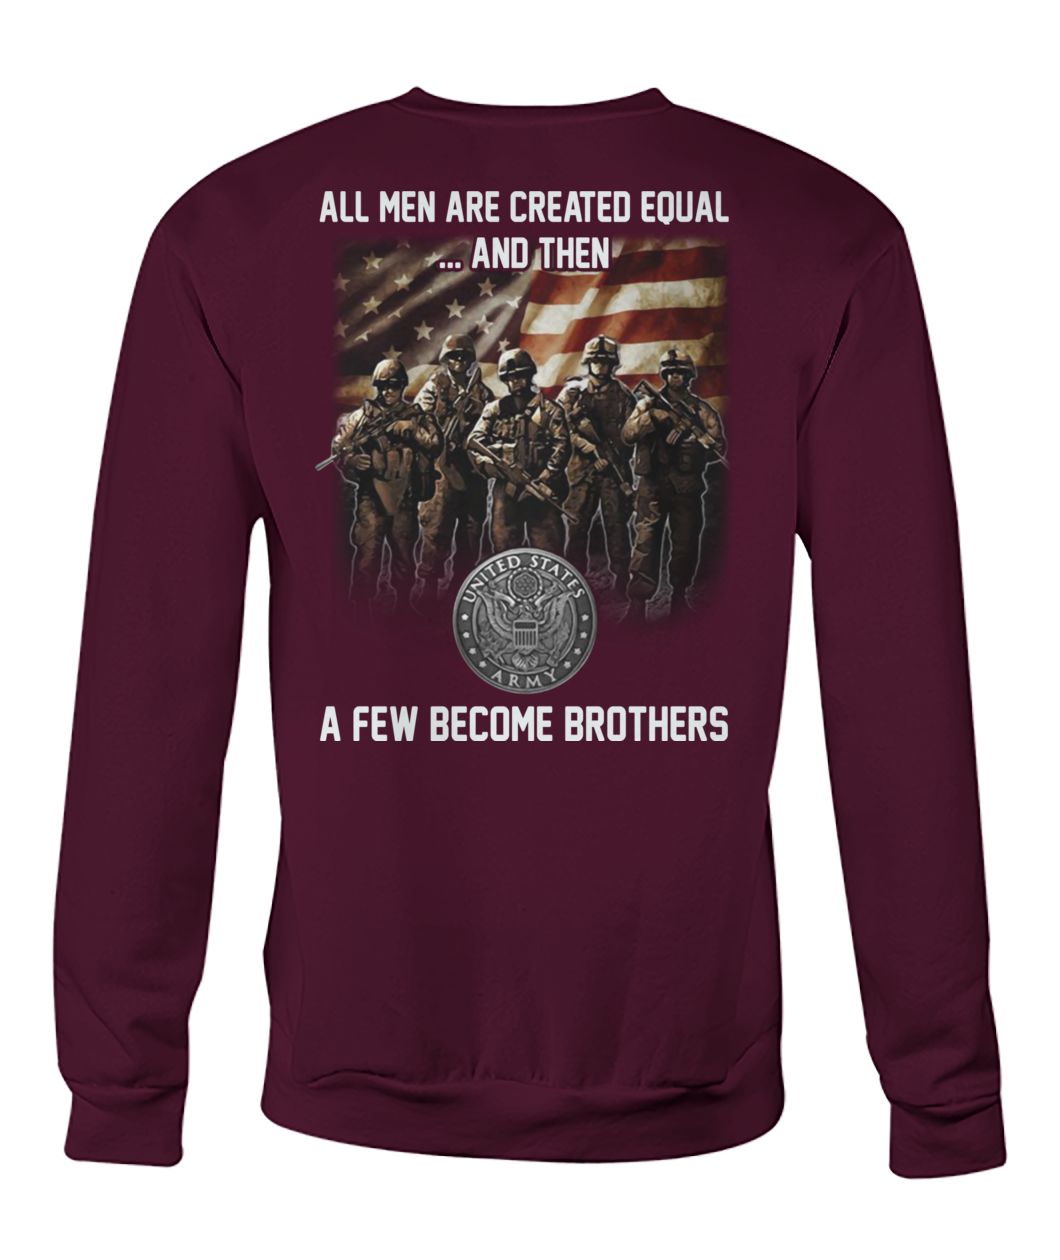 United states army all men are created equal and then a few become brothers crew neck sweatshirt